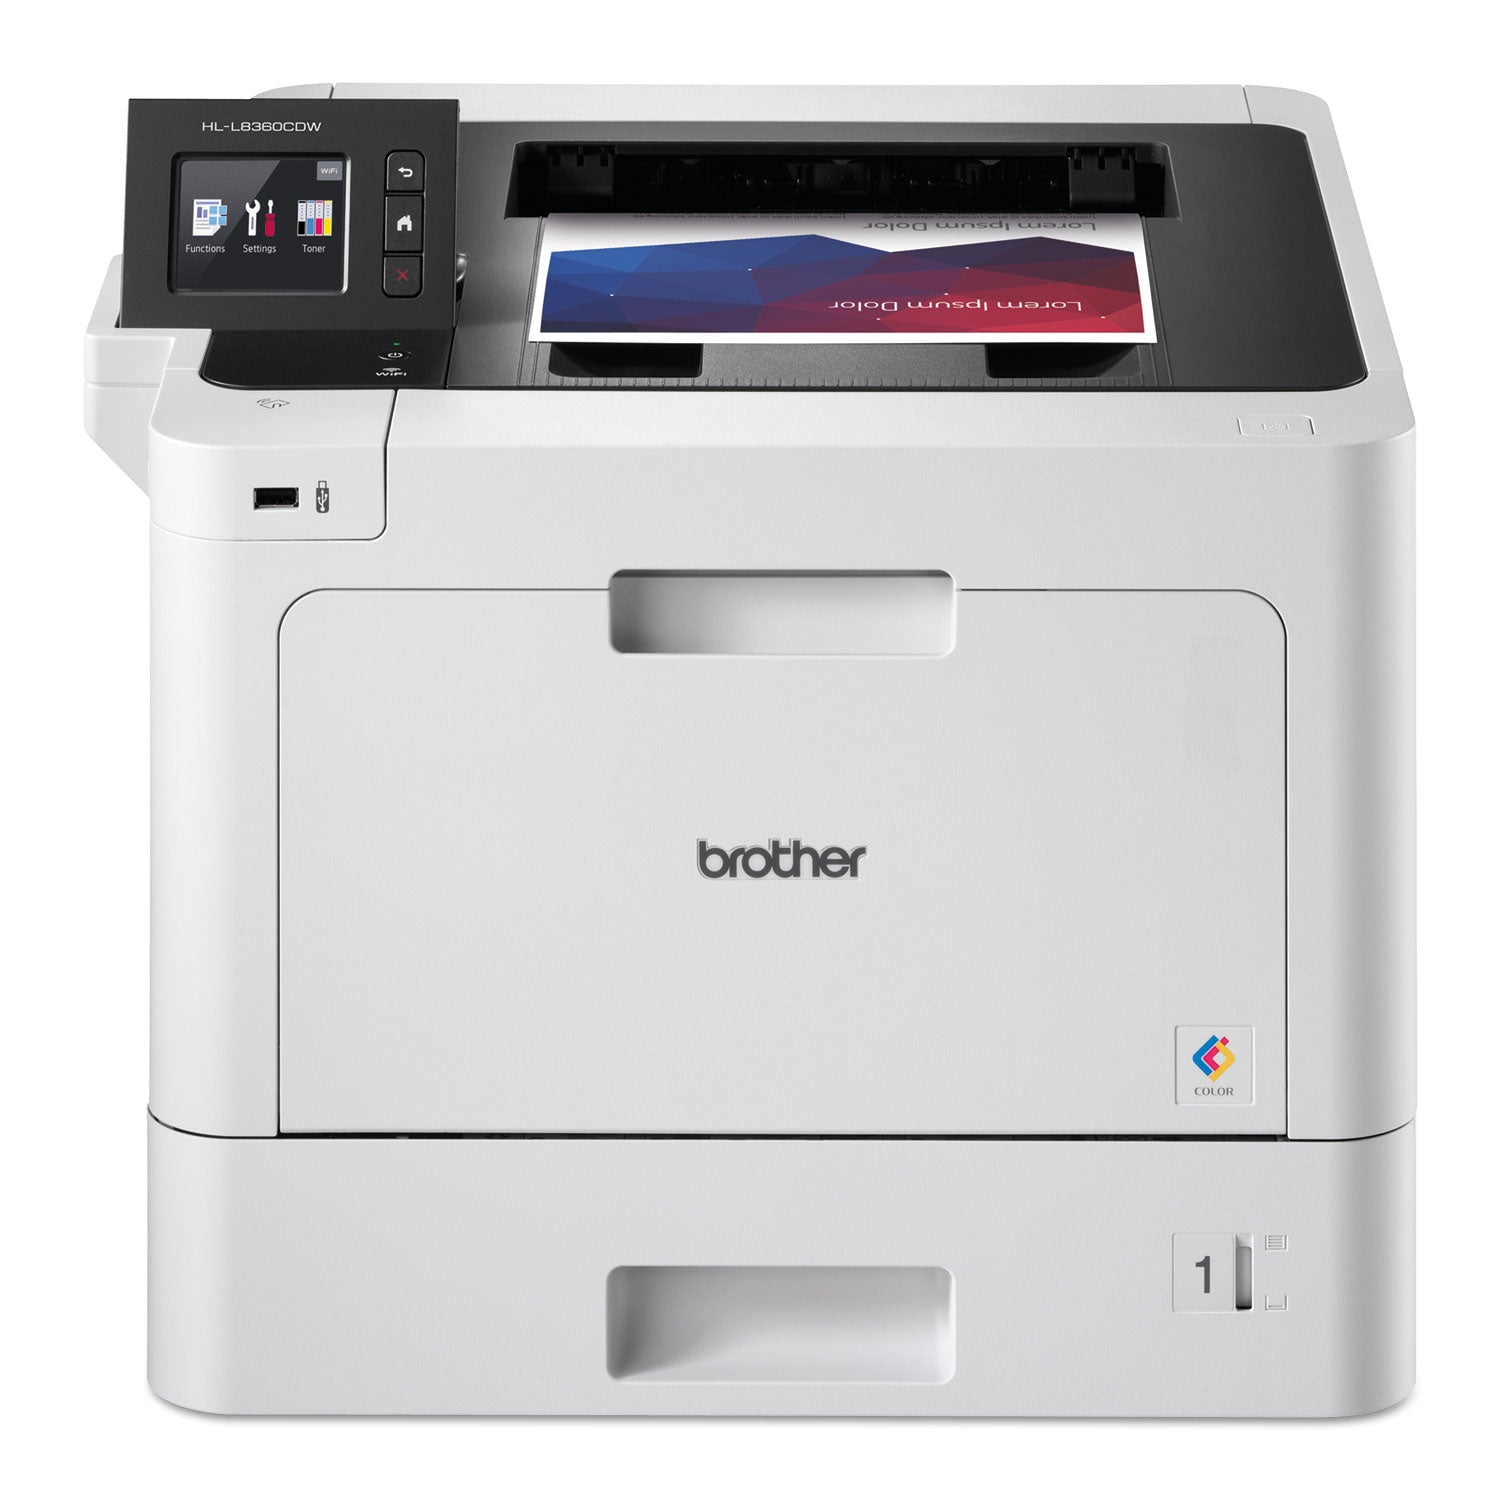 hll8360cdw-business-color-laser-printer-with-duplex-printing-and-wireless-networking_brthll8360cdw - 4